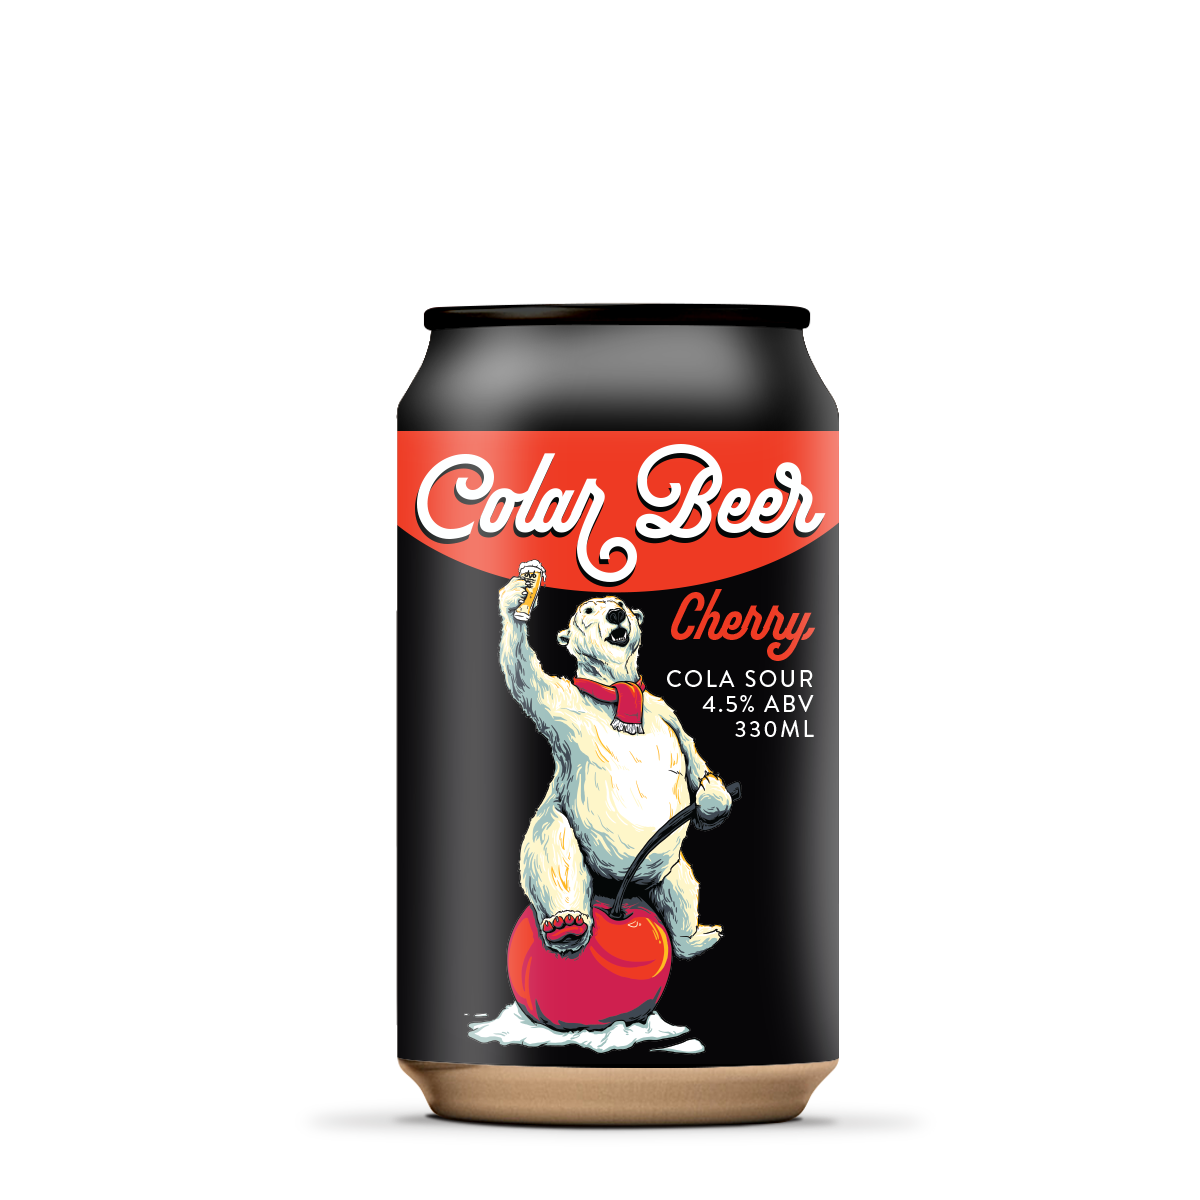 Colar Beer Mixed Sixpack